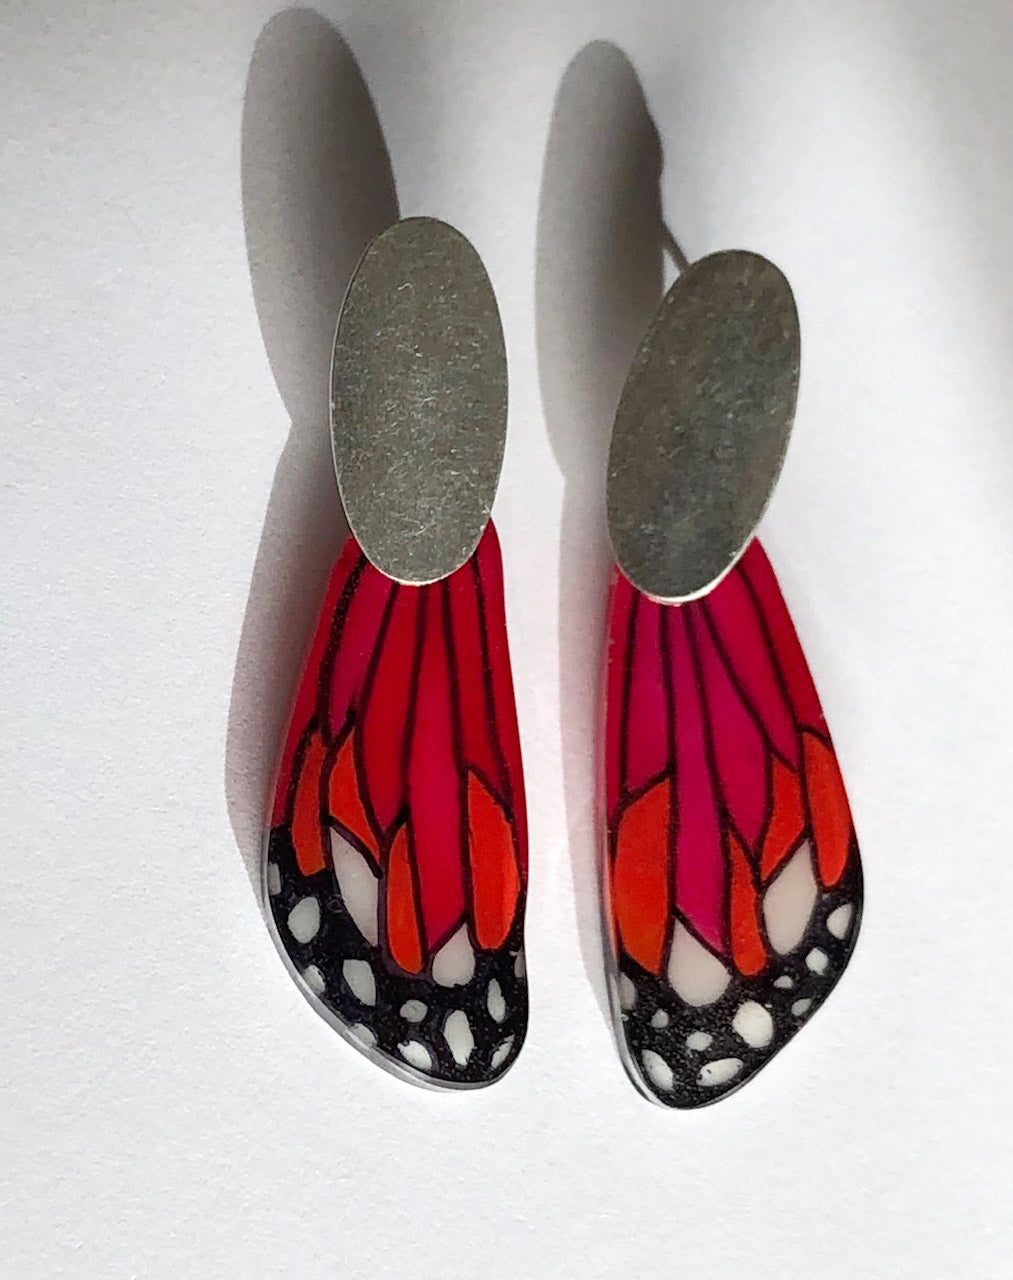 Handpainted Butterfly Earrings - Red Monarch - Dangling Wings with Silver Oval - Mini